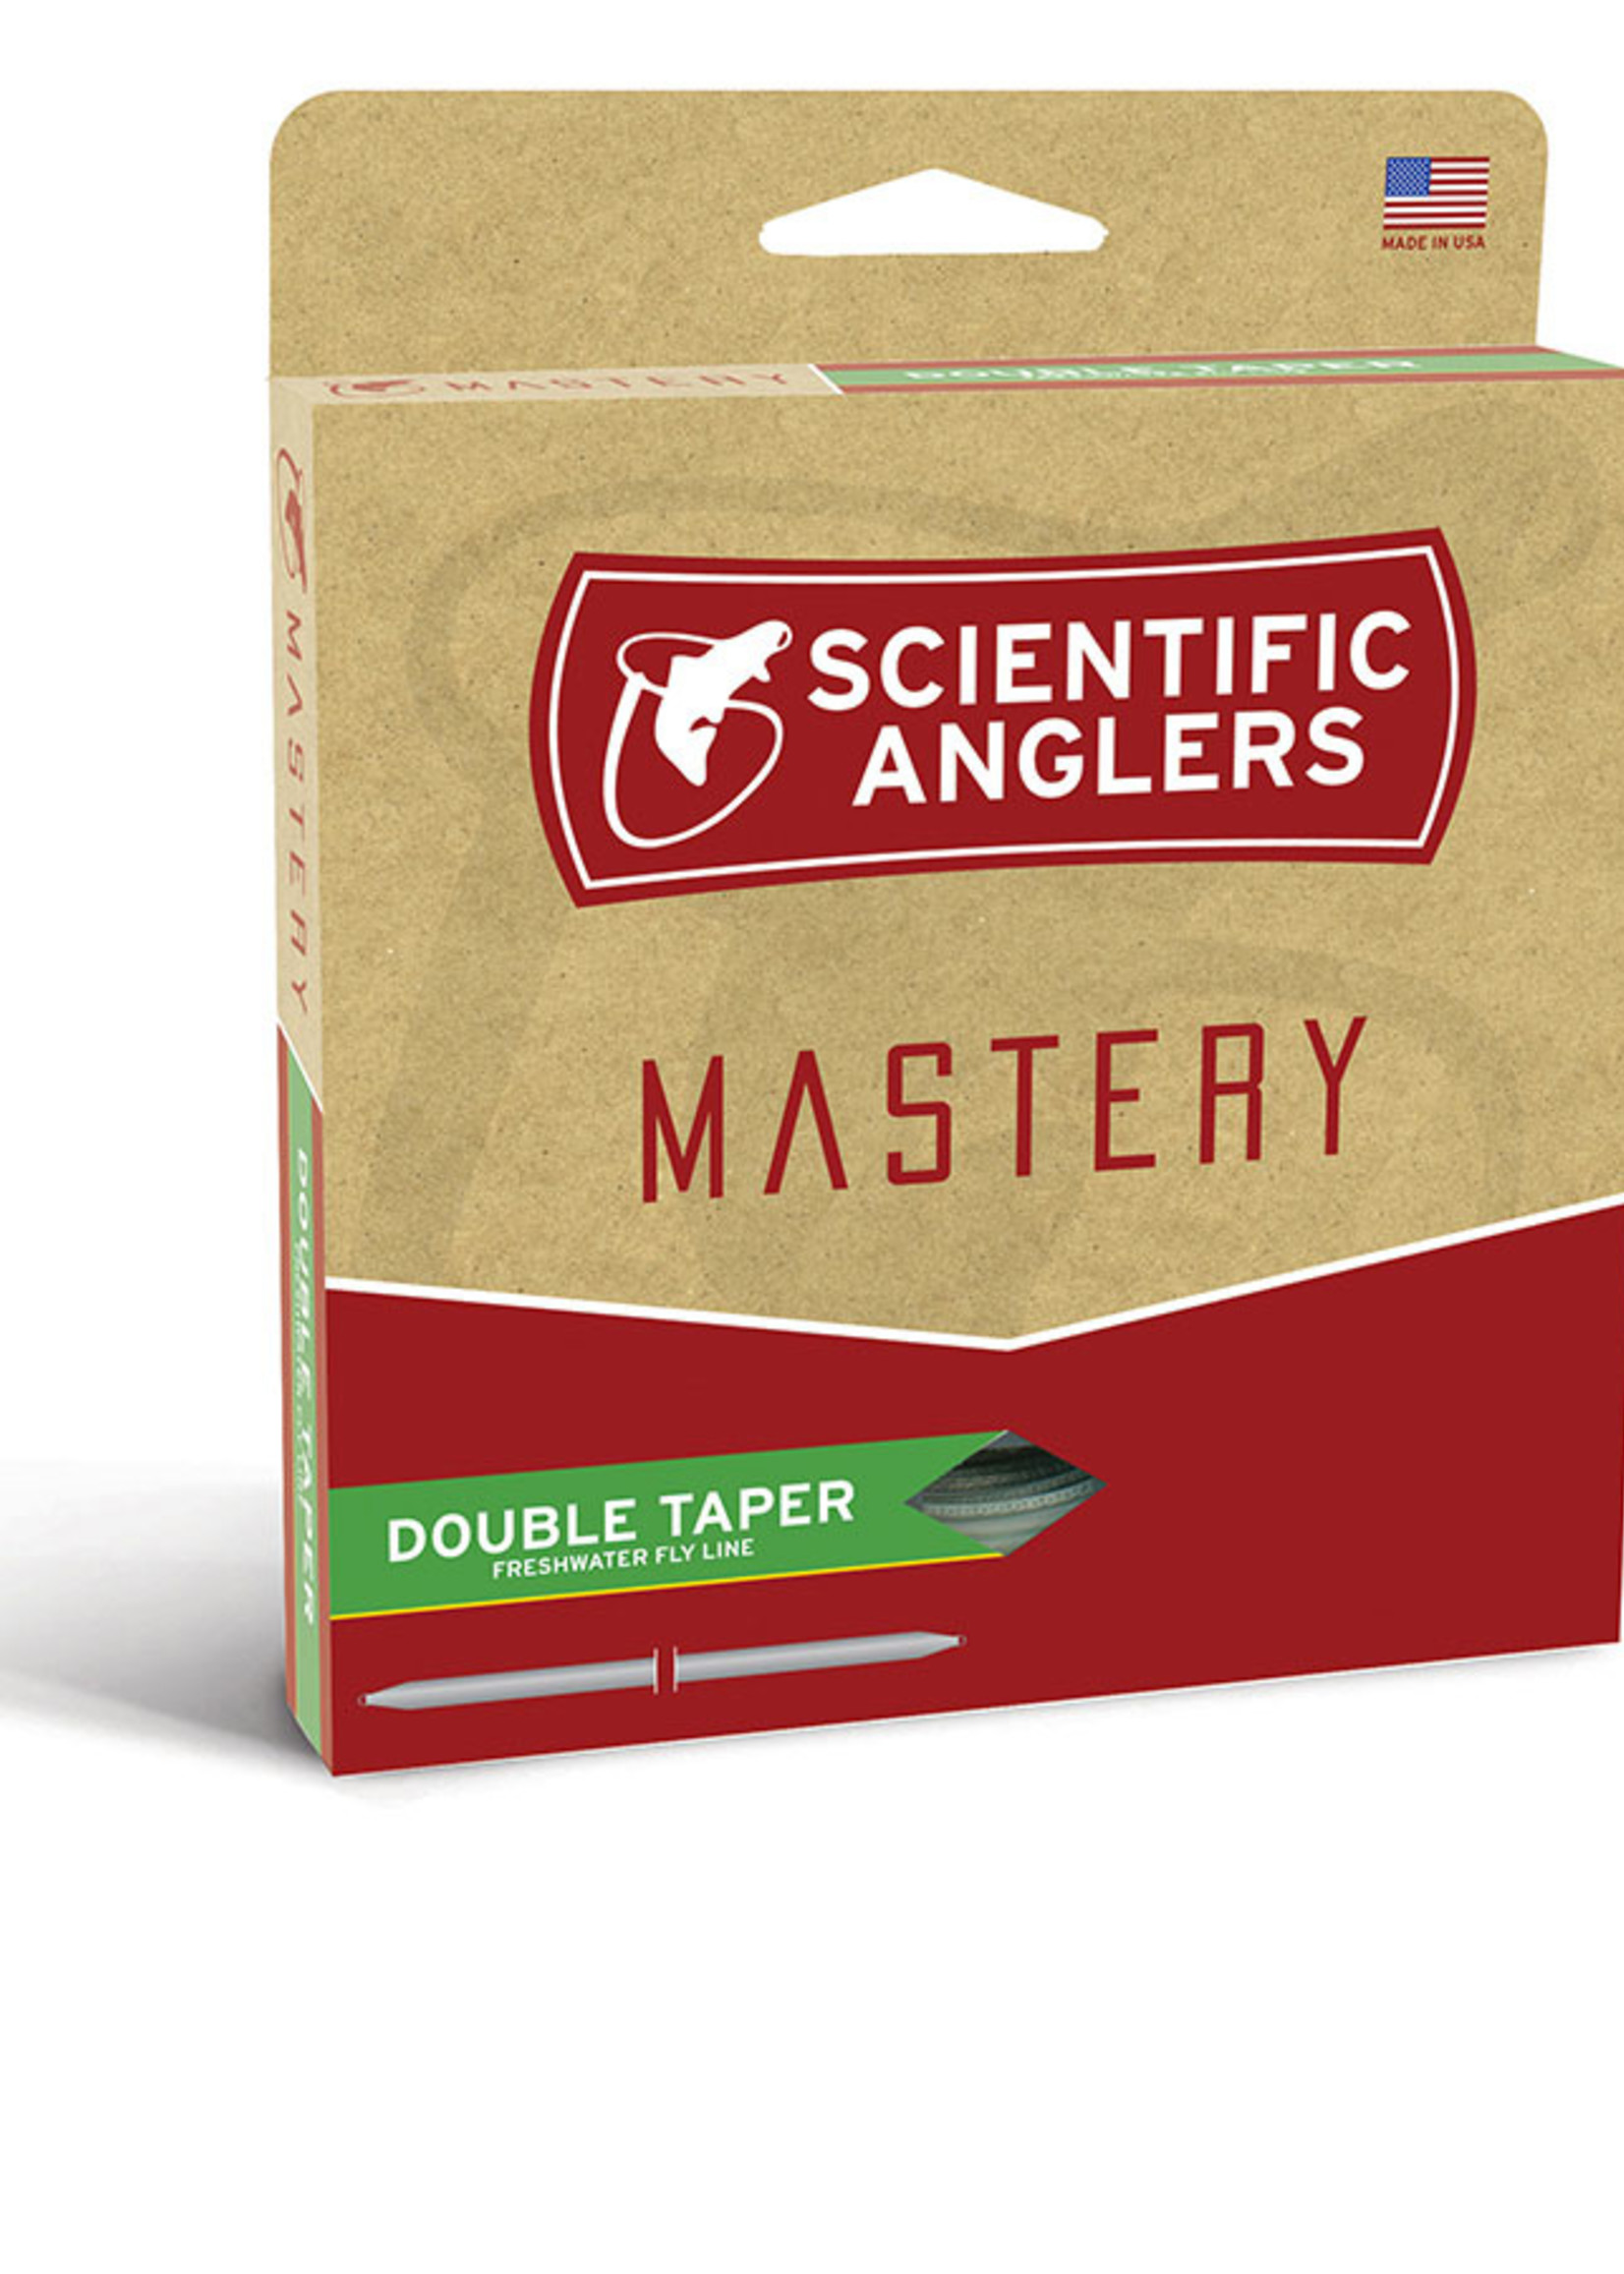 Scientific Anglers SA Double Taper Mastery Fly Line